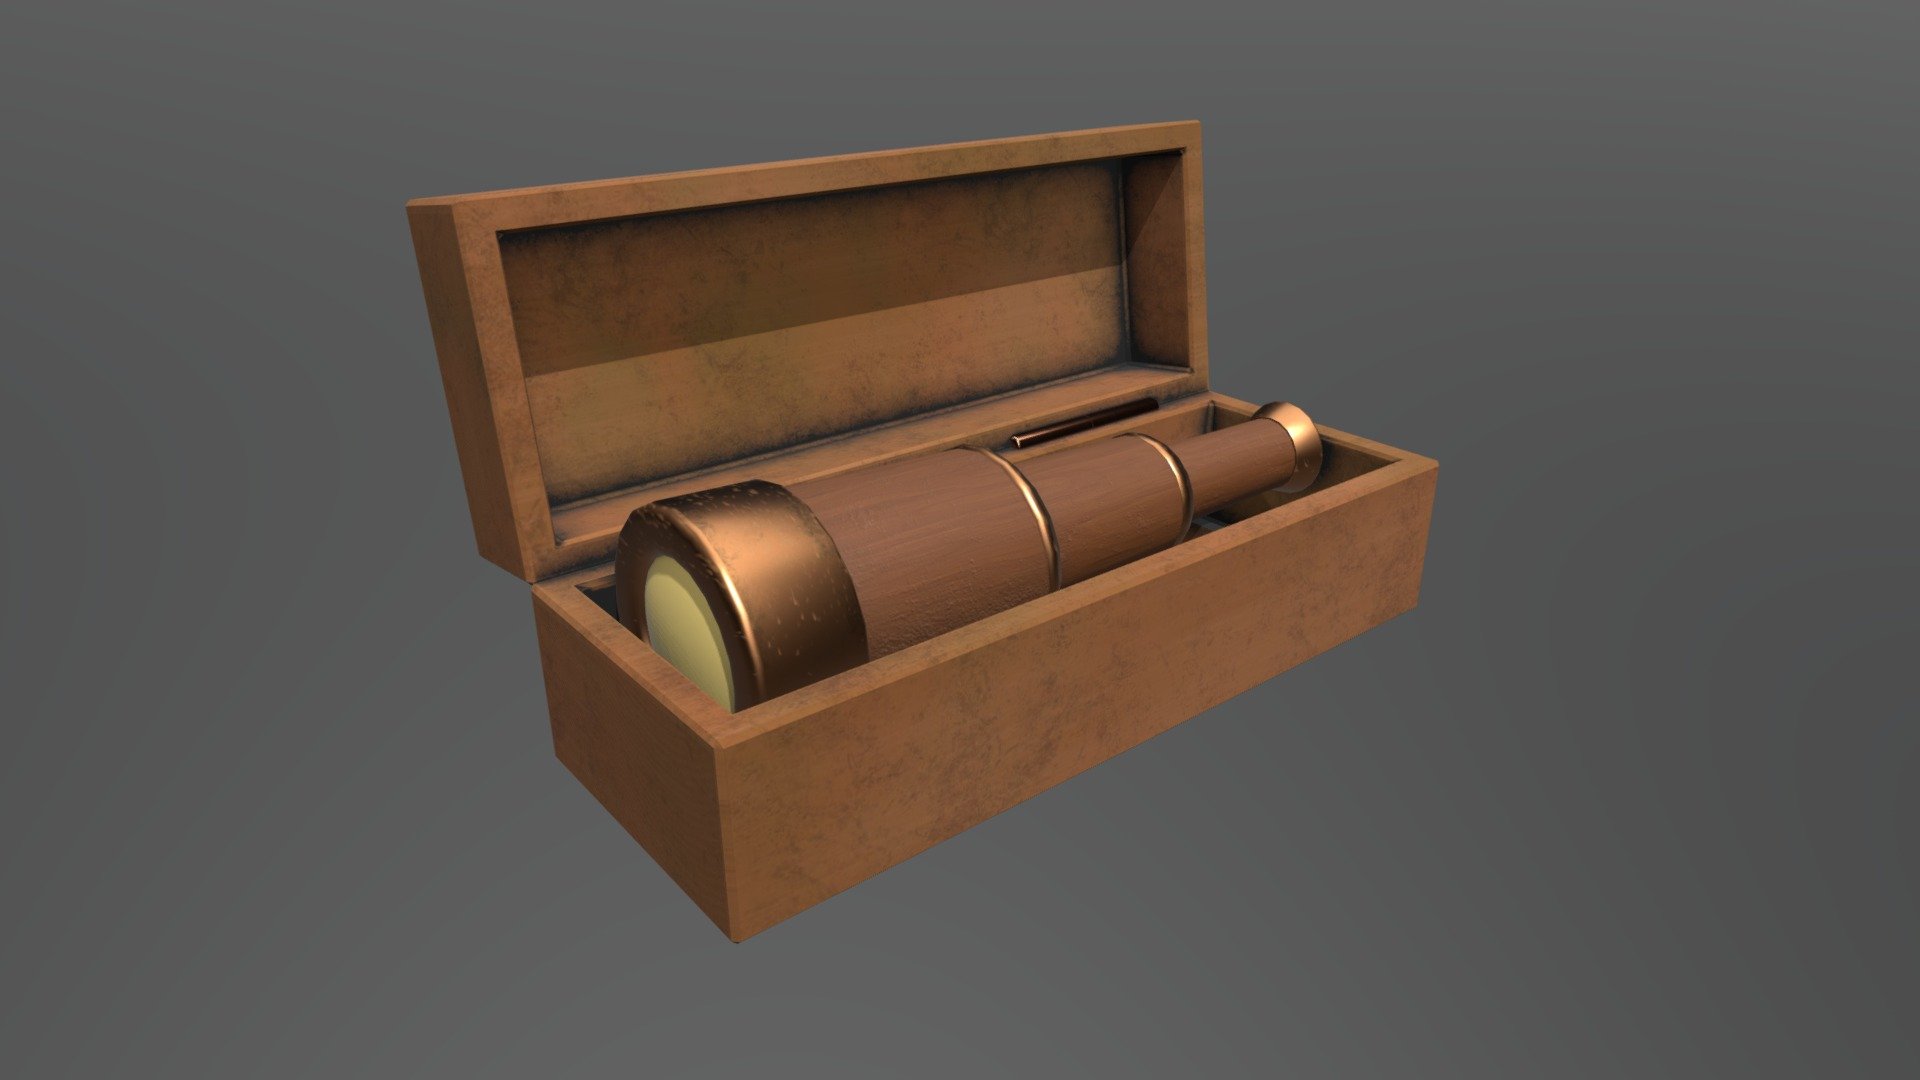 The model is made in 3ds Max 2017 and textured in Substance Painter. Spyglass is actually MAGICAL and GLOWS under certain conditions (at least is has emissive maps).


Archive includes models (spyglass only and spyglass+box) centered to 0.0.0 scene coordinates (box lid is centered to its rotation point) in .max, .blend, .fbx and .obj formats
Textures come in 2 sets (spyglass and box) in 2k resolution
Archives include .png, .jpeg and .targa textures for UE4, .png textures for Unity HD, arnold, vray and corona
Everything is named properly
Textures are not included into .fbx files and have to be plugged in manually
Model size might be a bit off, so it might be a good idea to rescale it in scene or game engine
Nothing is animated
Everything is named properly 
Spyglass and box have 2258 polygons and 2248 vertices. Spyglass only has 1604 polygons and 1626 vertices

Best wishes, enjoy &amp; have a nice day!:D - Simple stylized low-poly spyglass and box for it - 3D model by Art-Teeves 3d model